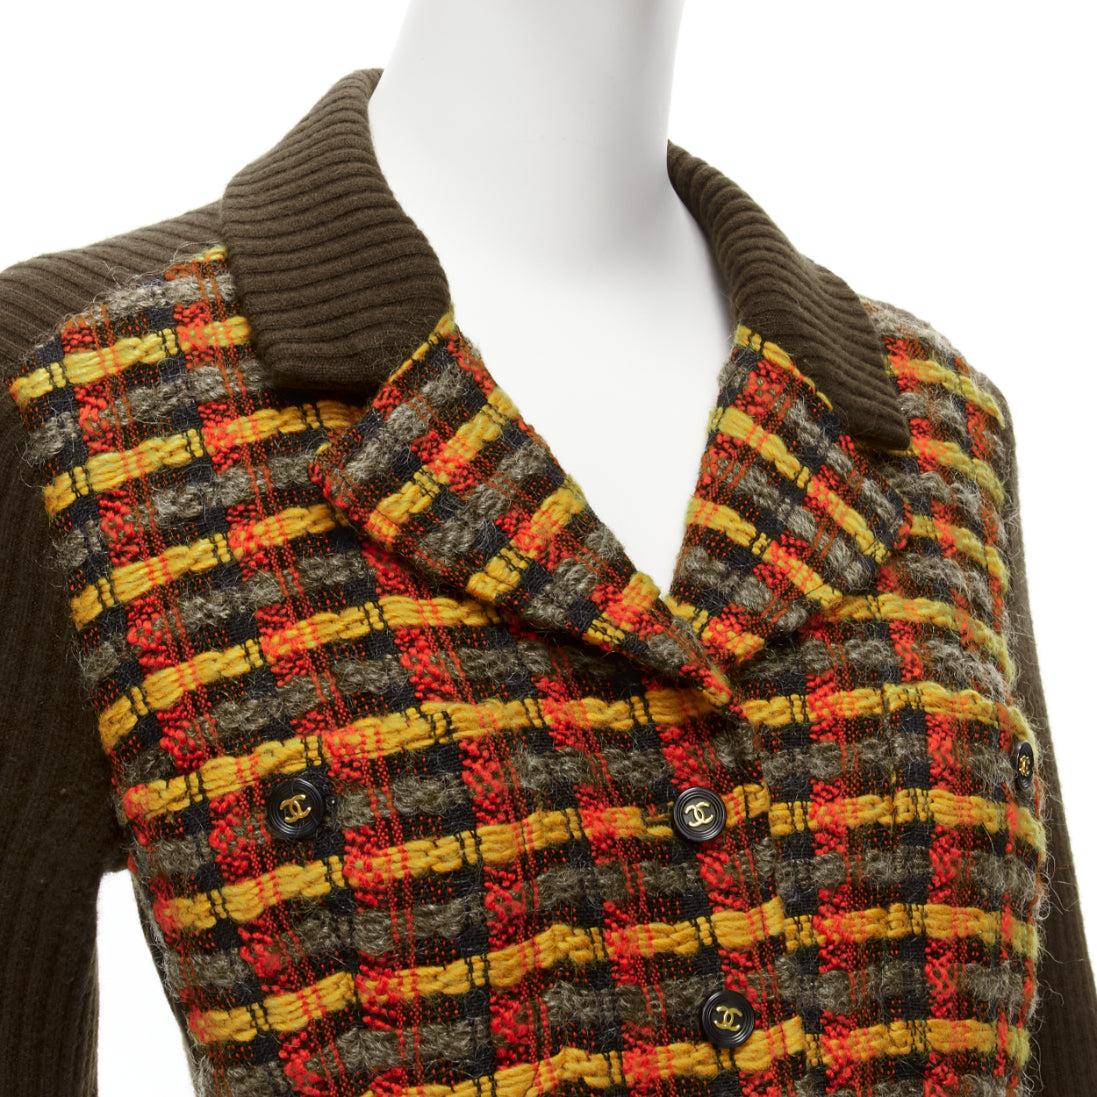 CHANEL 95A 100% cashmere brown yellow checked tweed vest illusion layered ribbed dress FR36 S
Reference: TGAS/D00766
Brand: Chanel
Designer: Karl Lagerfeld
Collection: 95A
Material: Cashmere, Blend
Color: Brown, Yellow
Pattern: Tweed
Closure: